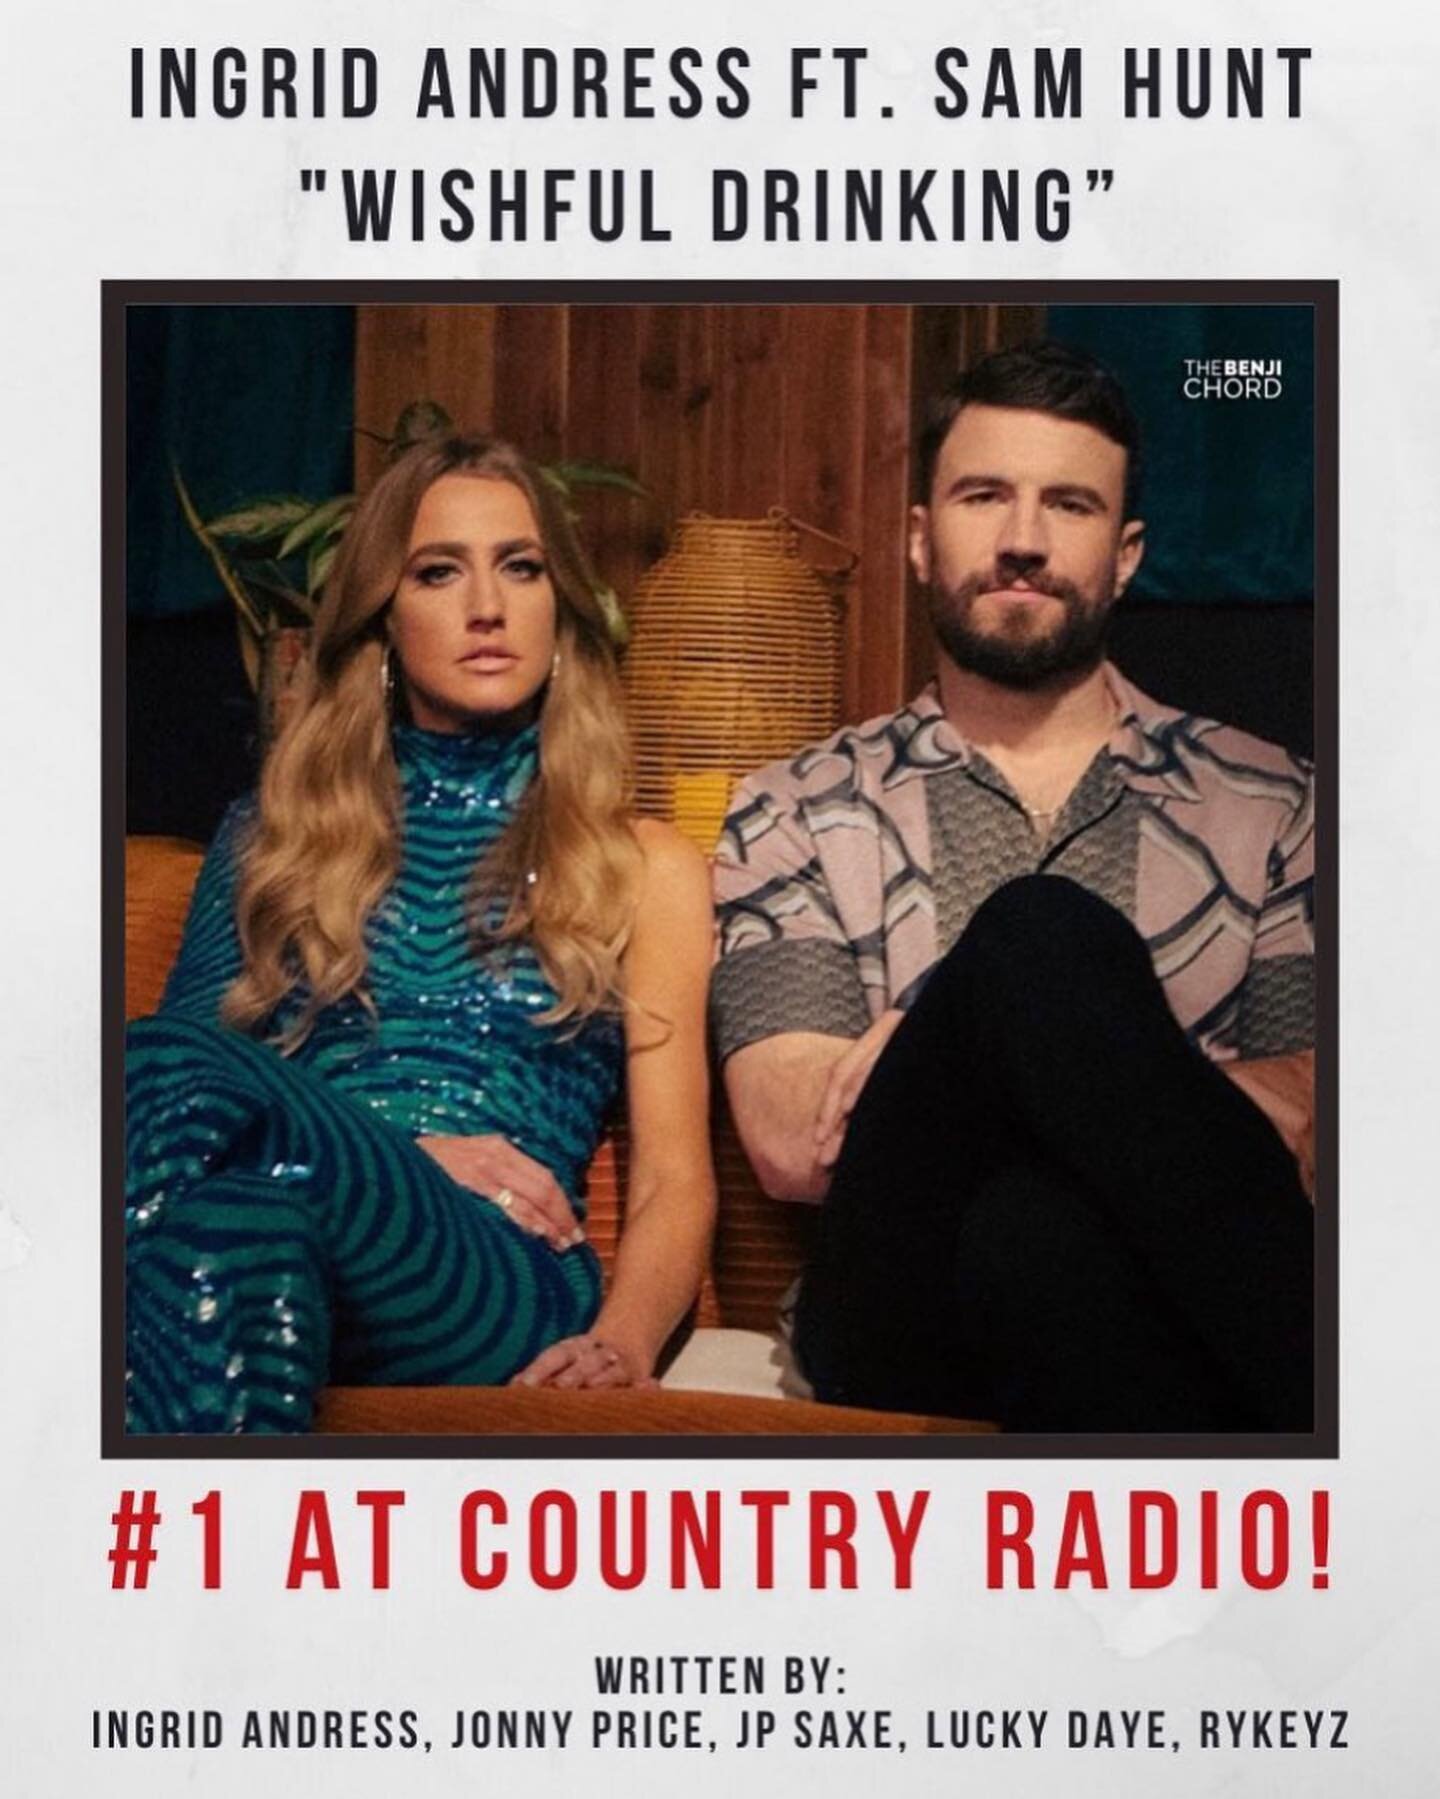 CONGRATULATIONS to the WICKEDly talented Adele Dahzeem/my husband @jonnyprice !! His song Wishful Drinking SKYROCKETED to the NUMBER ONE spot on country radio this week!! The number one country song in the world!!! And then the record went PLATINUM!!